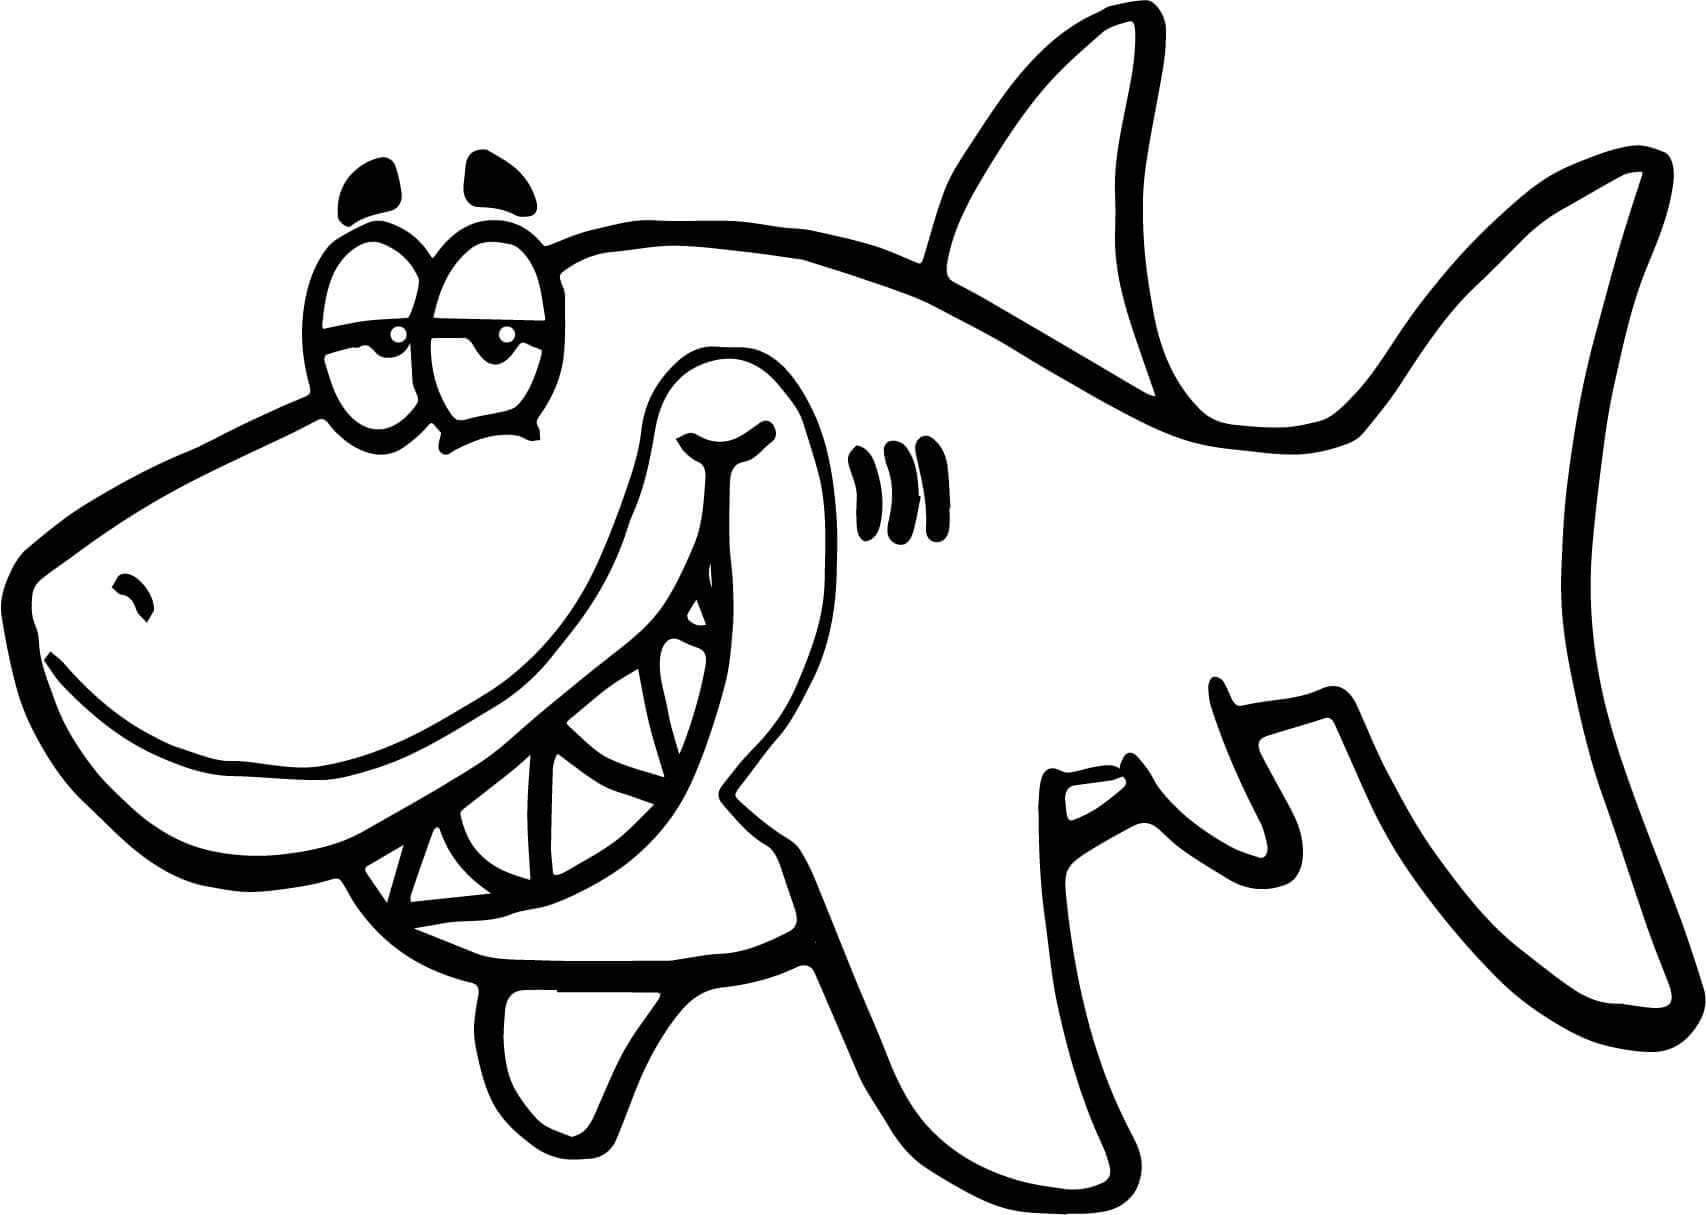 Printable Shark Coloring Pages
 33 Free Shark Coloring Pages Printable